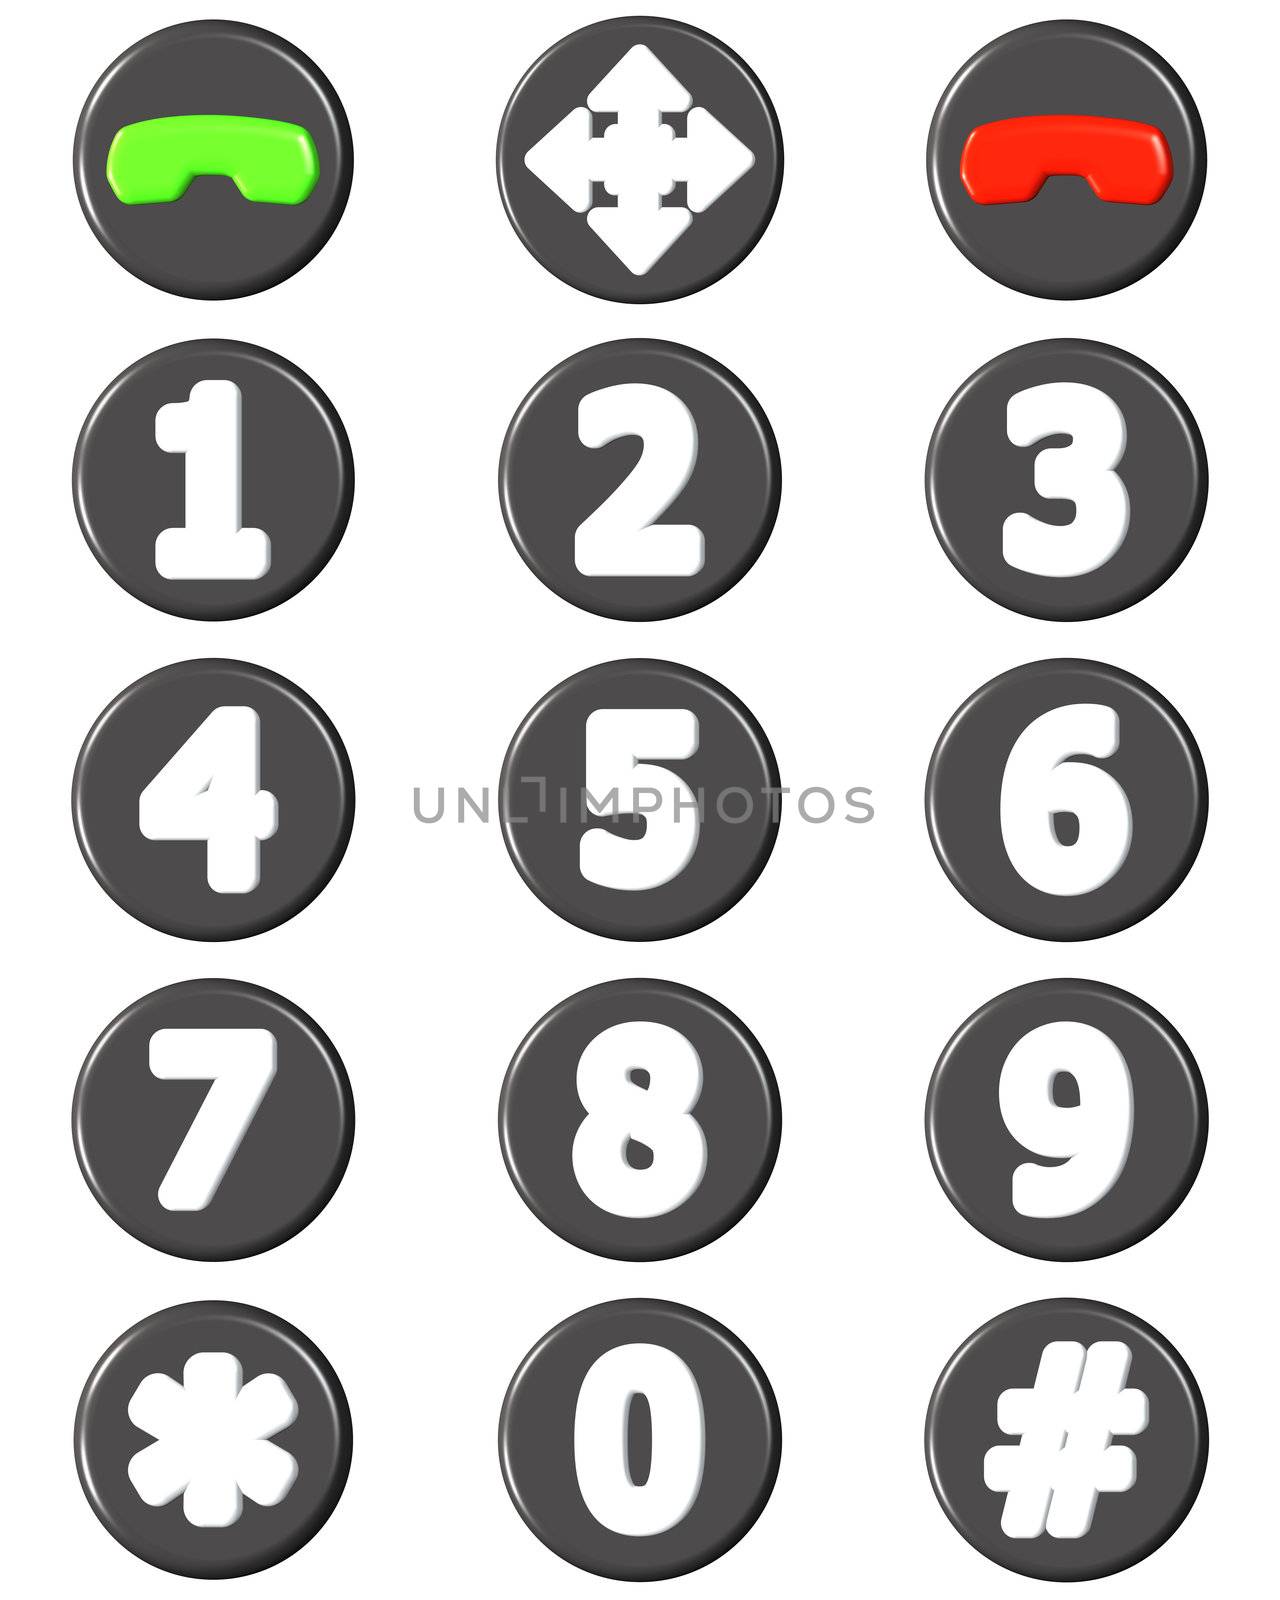 black and white phone buttons